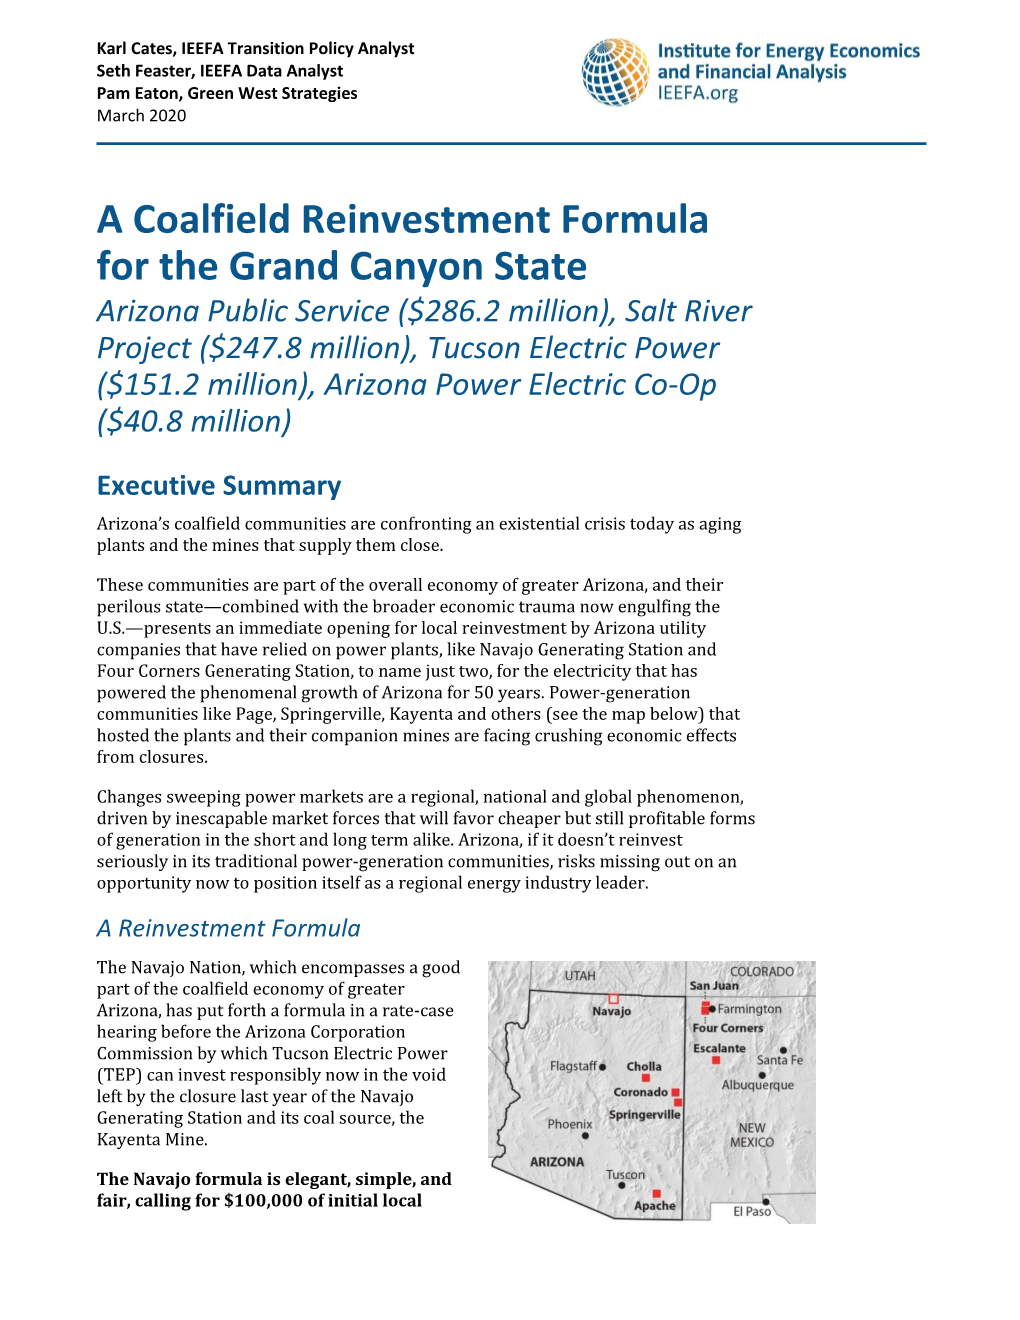 A Coalfield Reinvestment Formula for the Grand Canyon State